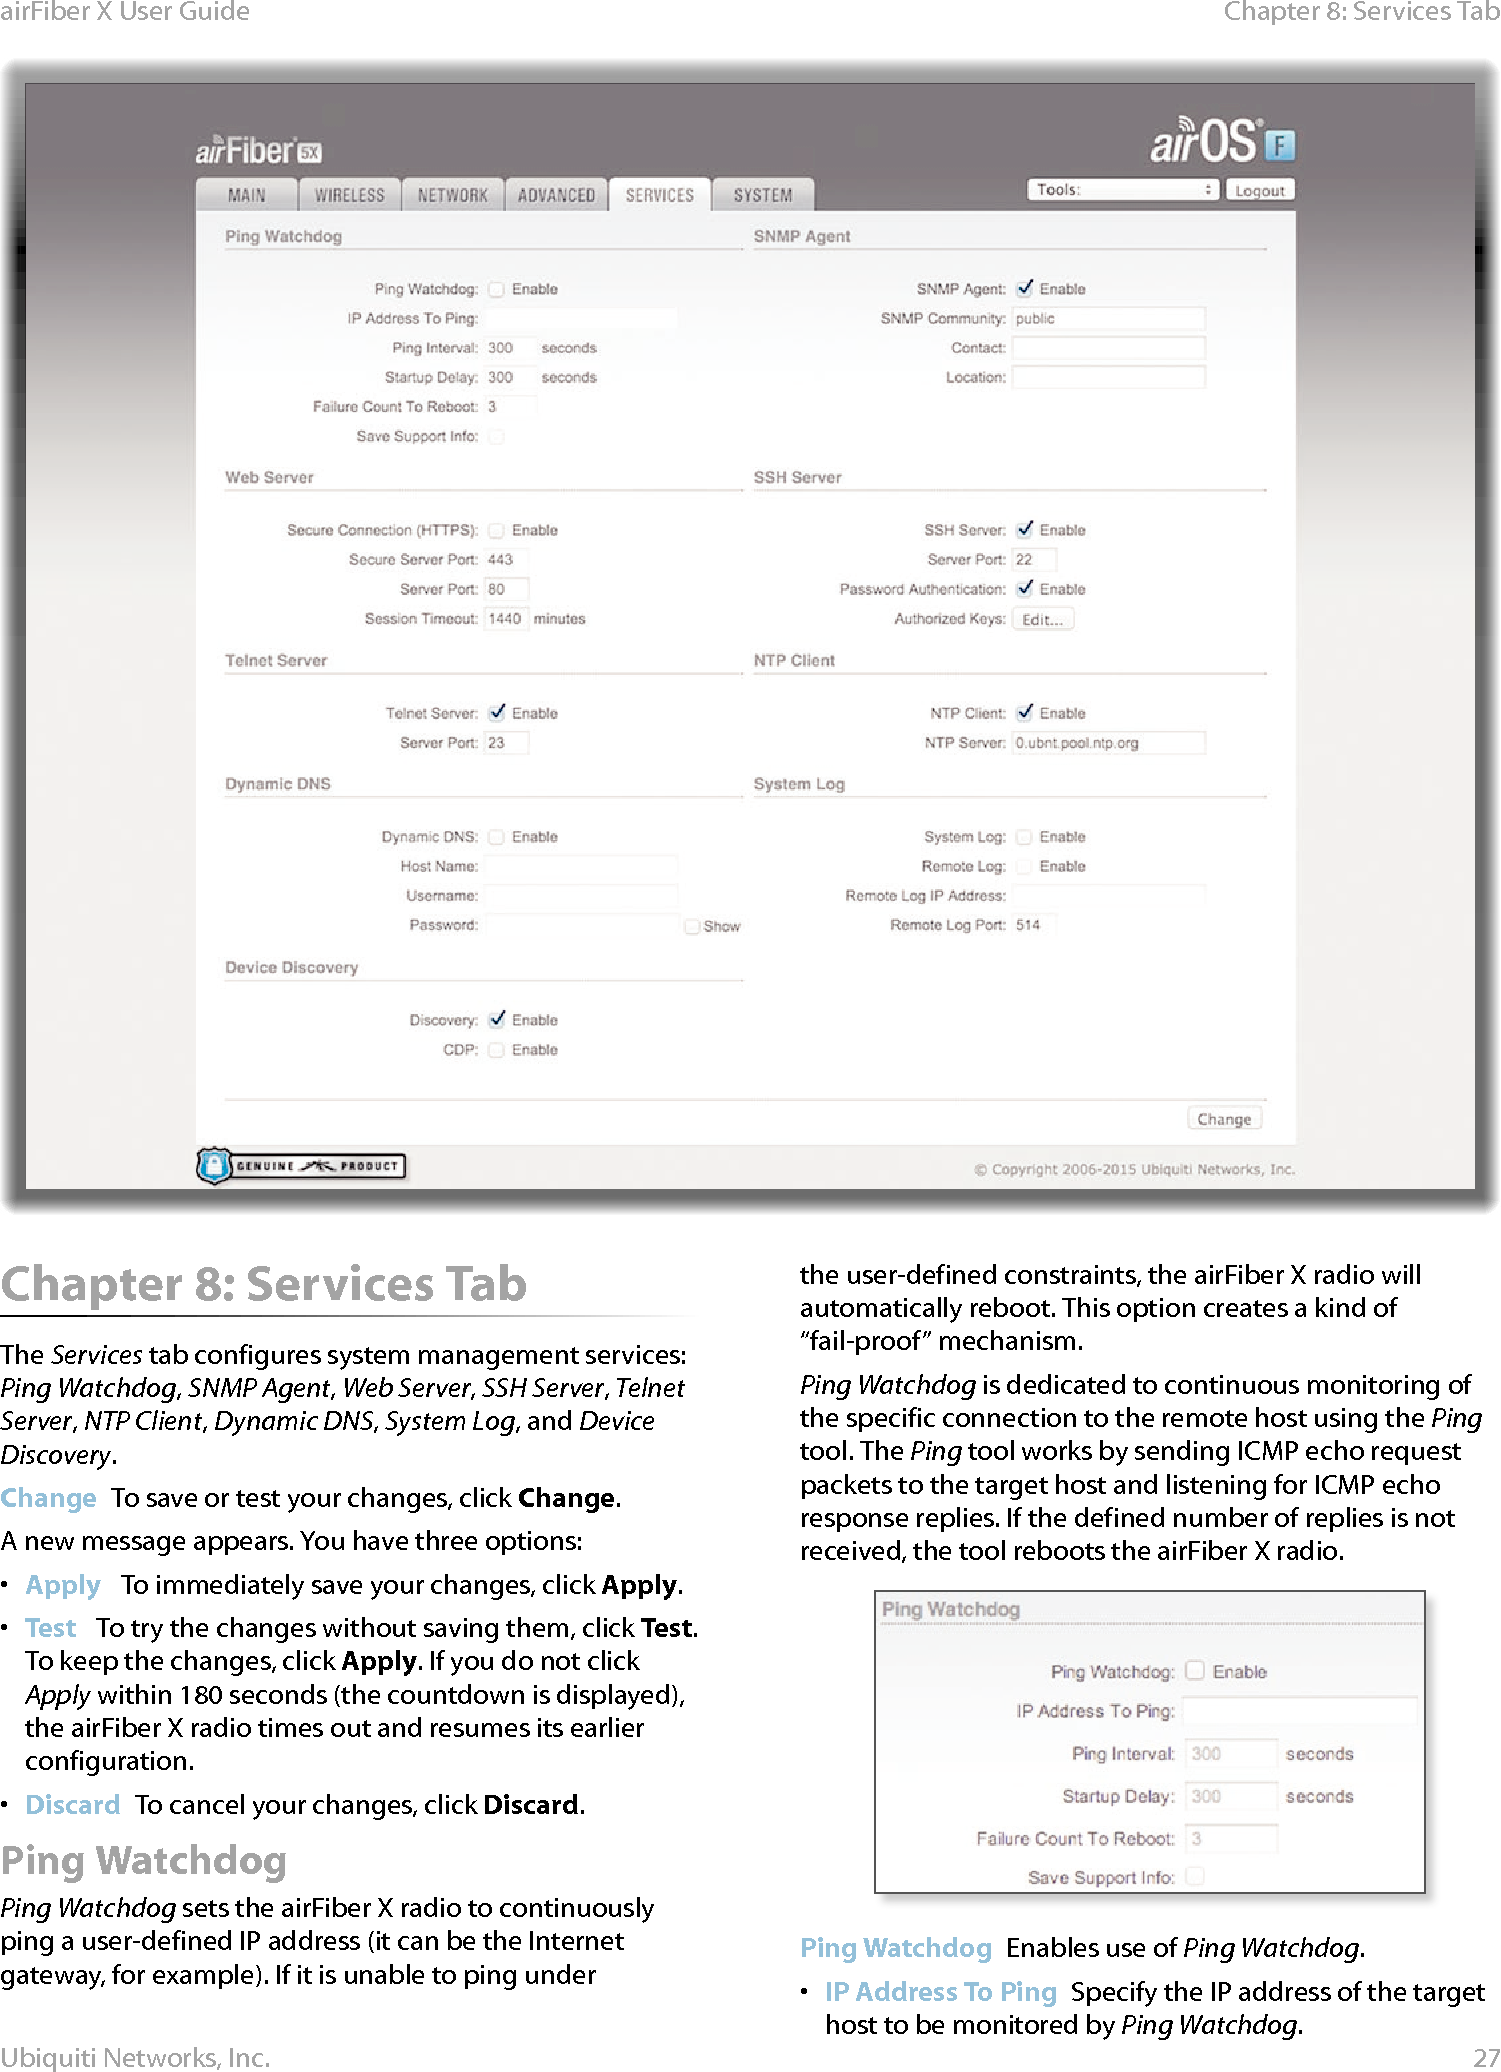 27Chapter 8: Services TabairFiber X User GuideUbiquiti Networks, Inc.Chapter 8: Services TabThe Services tab configures system management services: Ping Watchdog, SNMP Agent, Web Server, SSH Server, Telnet Server, NTP Client, Dynamic DNS, System Log, and Device Discovery.Change  To save or test your changes, click Change.A new message appears. You have three options:•  Apply   To immediately save your changes, click Apply.•  Test   To try the changes without saving them, click Test. To keep the changes, click Apply. If you do not click Apply within 180 seconds (the countdown is displayed), the airFiberX radio times out and resumes its earlier configuration.•  Discard  To cancel your changes, click Discard.Ping WatchdogPing Watchdog sets the airFiberX radio to continuously ping a user-defined IP address (it can be the Internet gateway, for example). If it is unable to ping under the user-defined constraints, the airFiberX radio will automatically reboot. This option creates a kind of “fail-proof” mechanism.Ping Watchdog is dedicated to continuous monitoring of the specific connection to the remote host using the Ping tool. The Ping tool works by sending ICMP echo request packets to the target host and listening for ICMP echo response replies. If the defined number of replies is not received, the tool reboots the airFiberX radio.Ping Watchdog  Enables use of Ping Watchdog.•  IP Address To Ping  Specify the IP address of the target host to be monitored by Ping Watchdog.